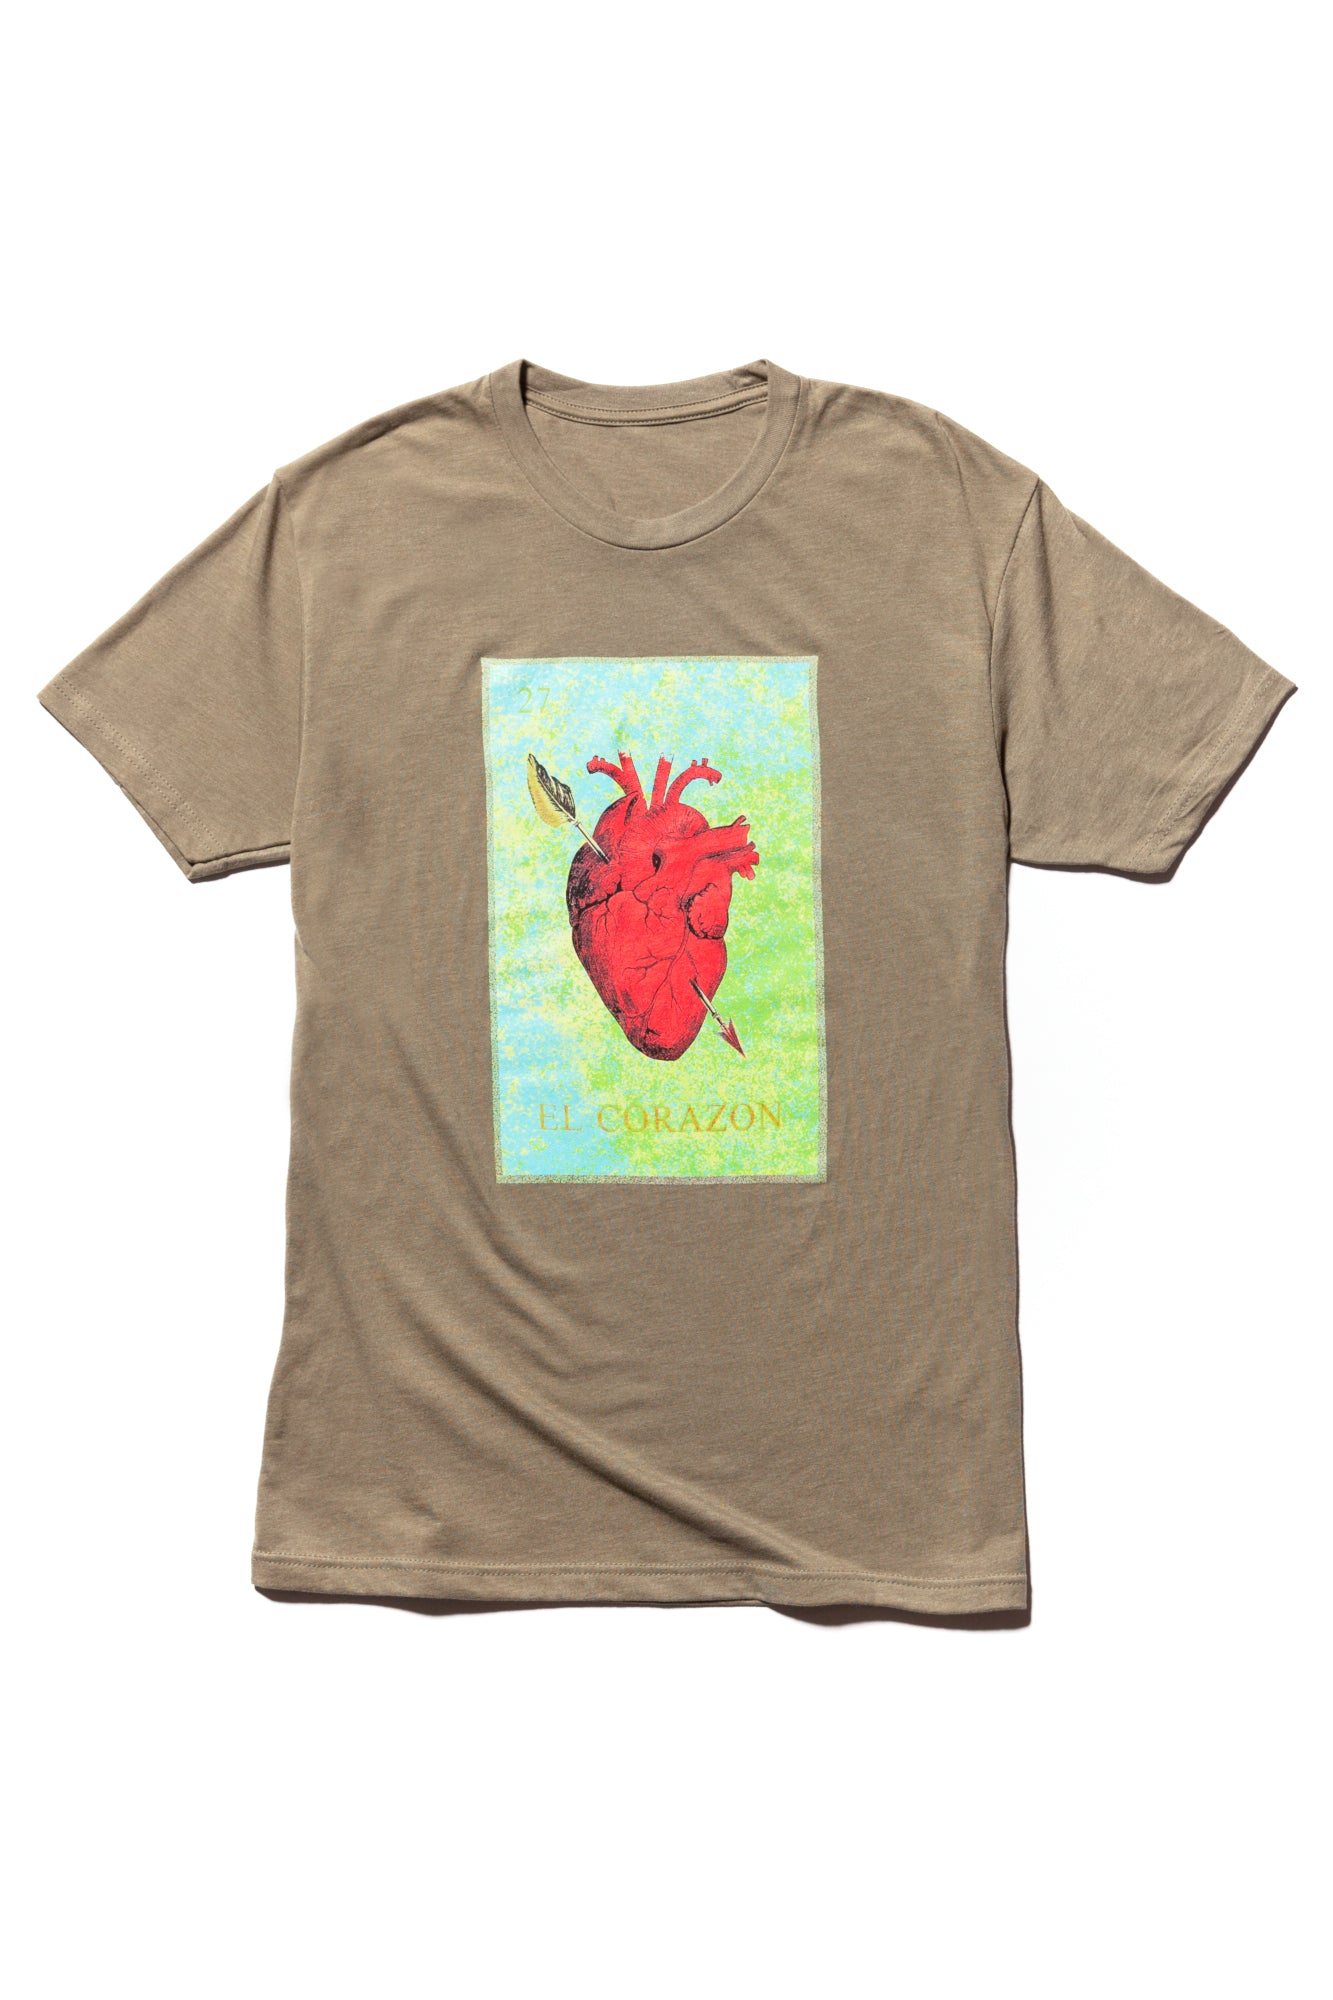 soundoff.mens.green.t.shirt.graphic.tee.el.corazon.the.warriors.heart.cotton.polyester.rayon.blend.